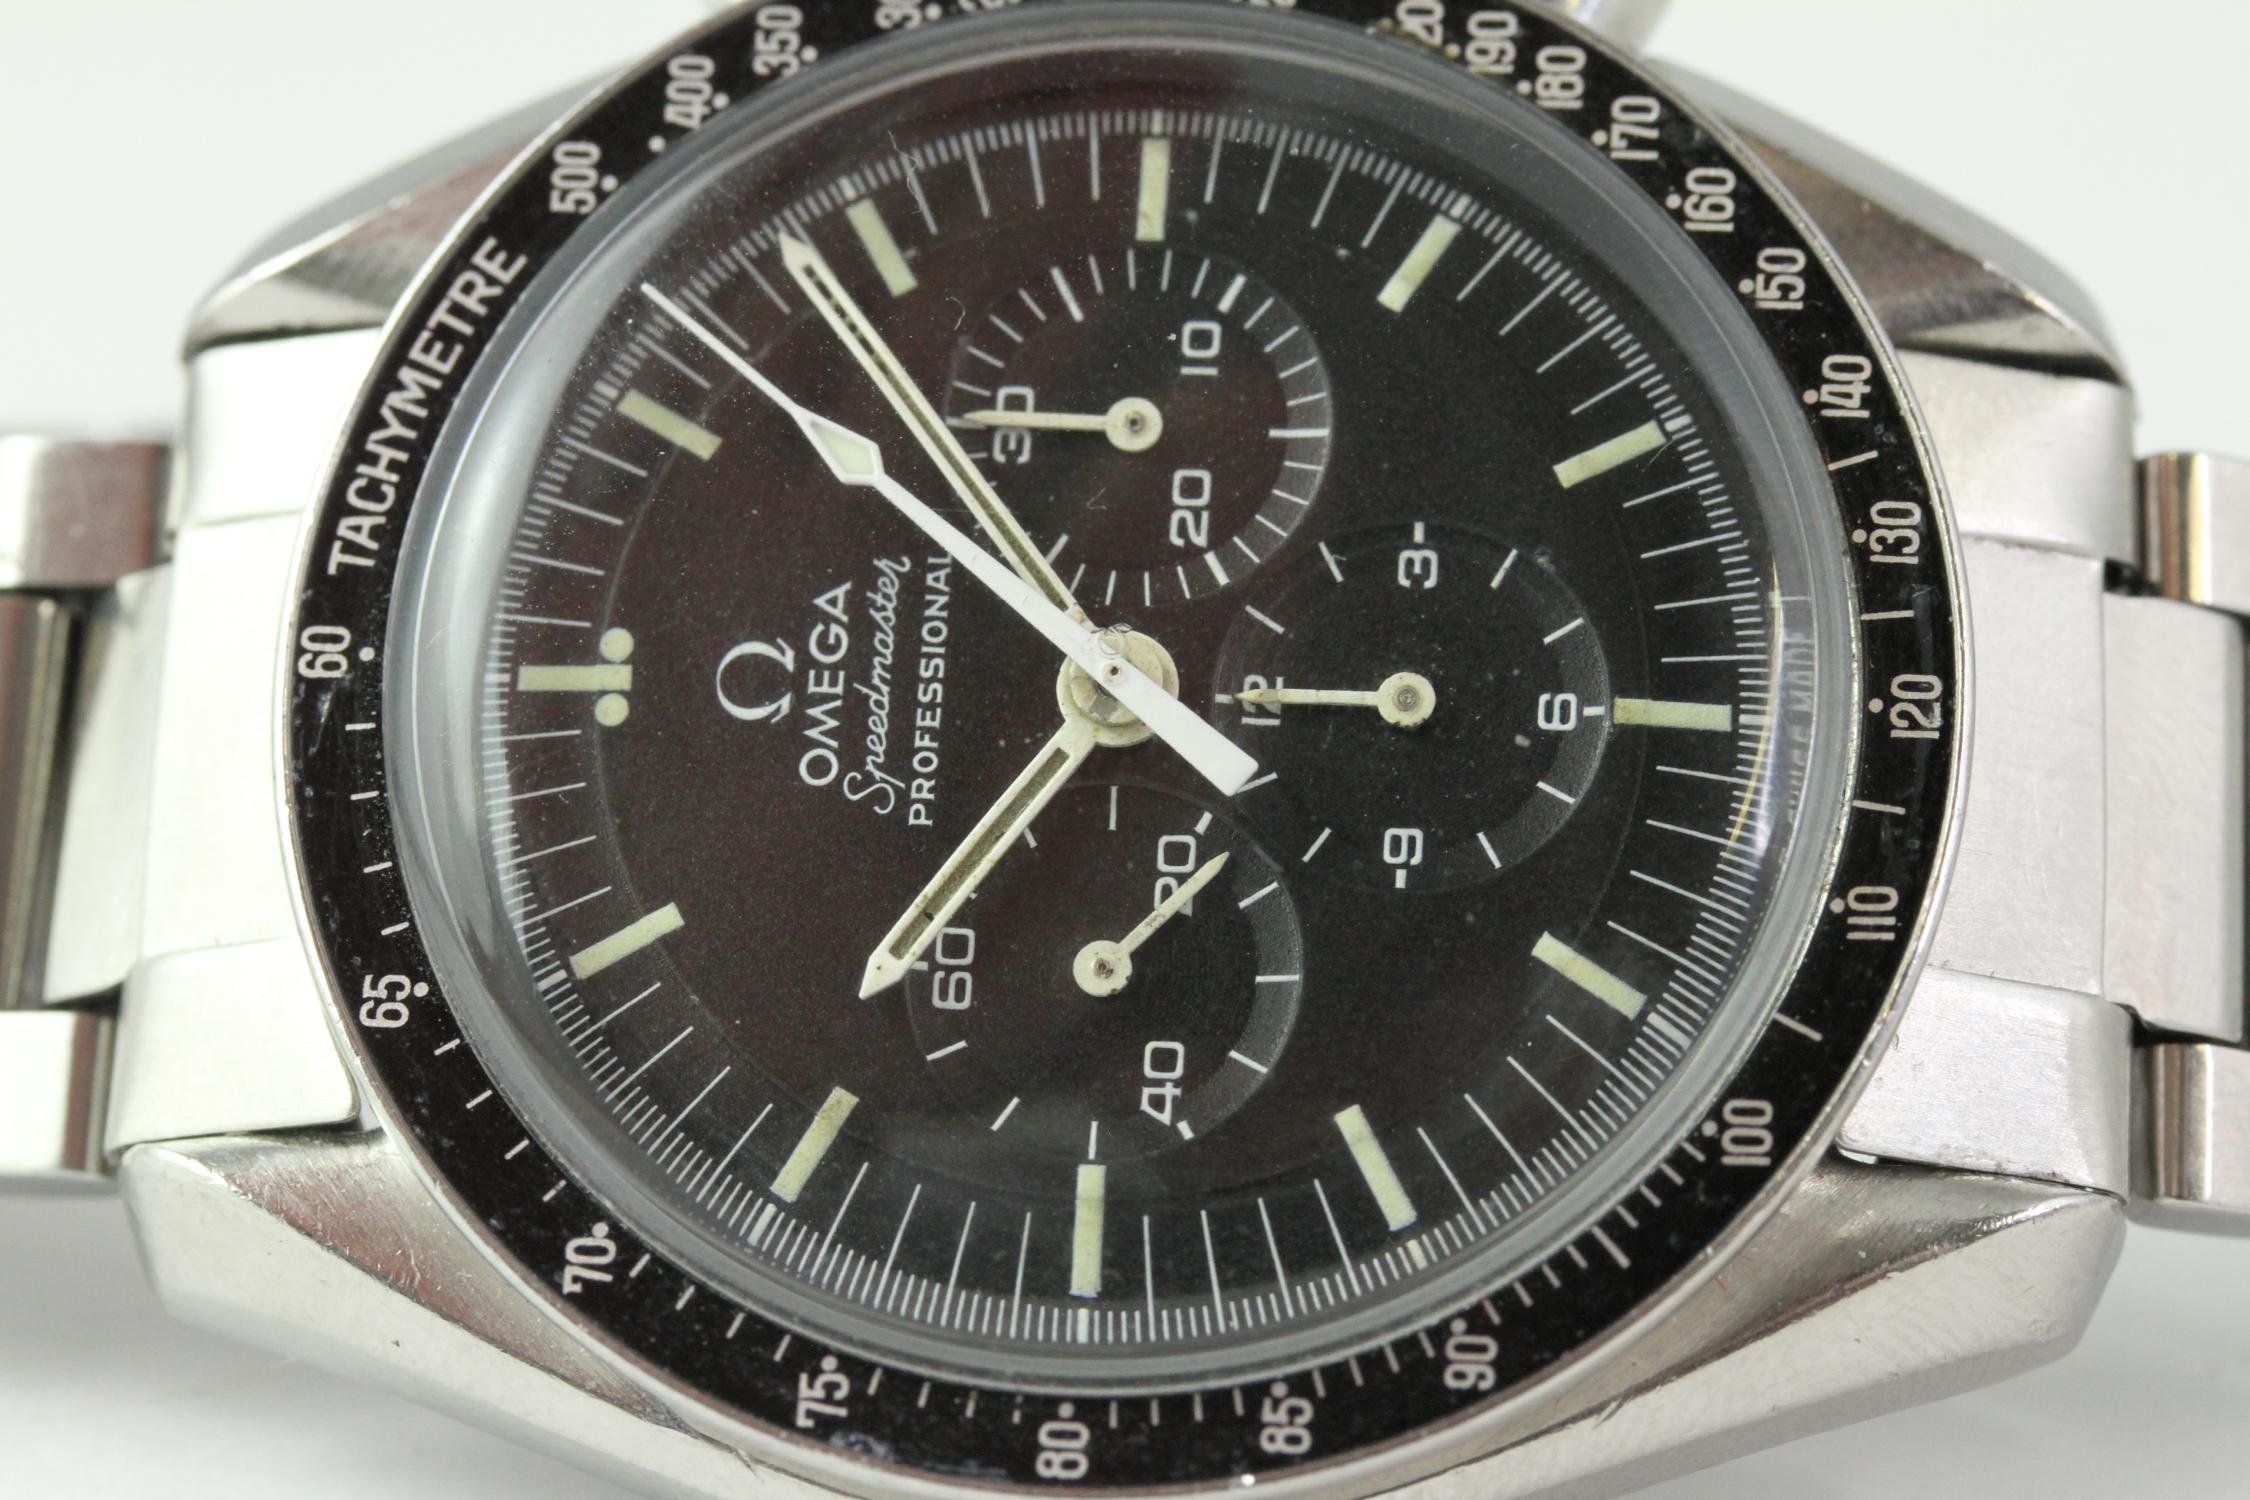 VINTAGE OMEGA SPEEDMASTER MOONWATCH 145.022 BOX AND PAPERS - Image 3 of 9